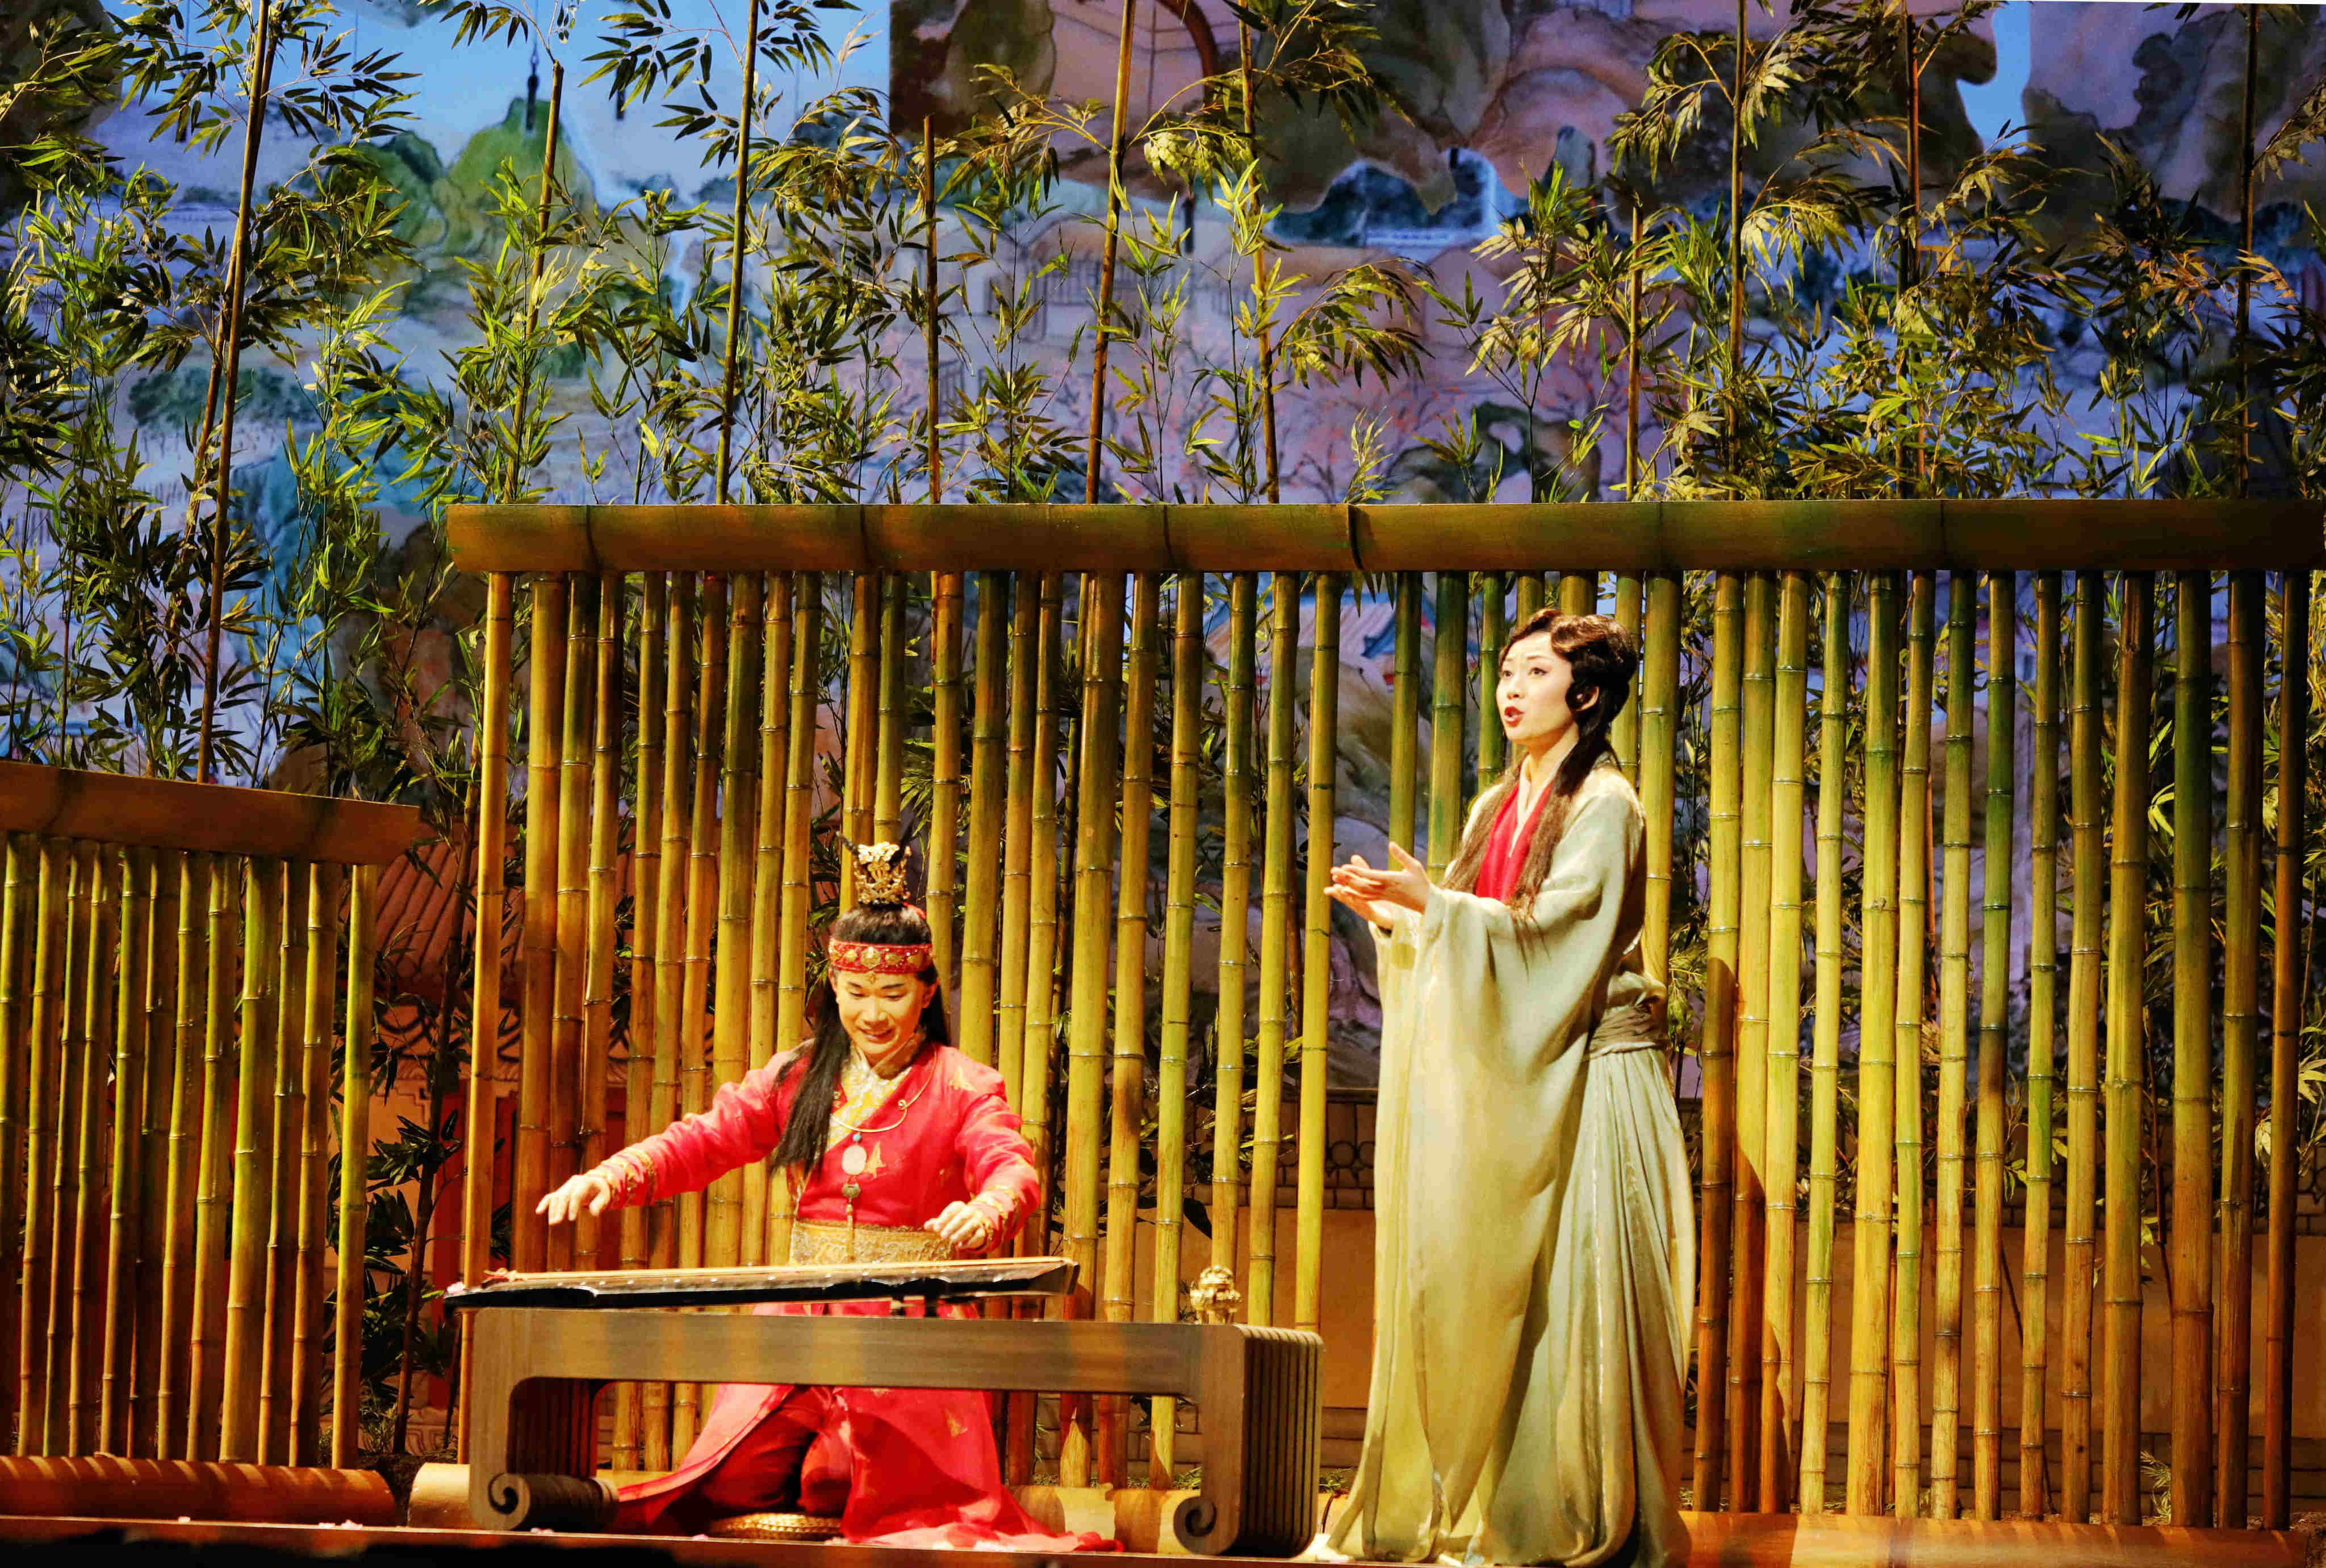 Chinese tenor Yijie Shi (left) as Jin Baoyu and South Korean soprano Pureum Jo as Lin Daoyu, one of the two first cousins his character is in love with, in a dress rehearsal for a production of “Dream of the Red Chamber”. The Chinese language has multiple terms for first cousins depending on their parentage. Photo: Xinhua